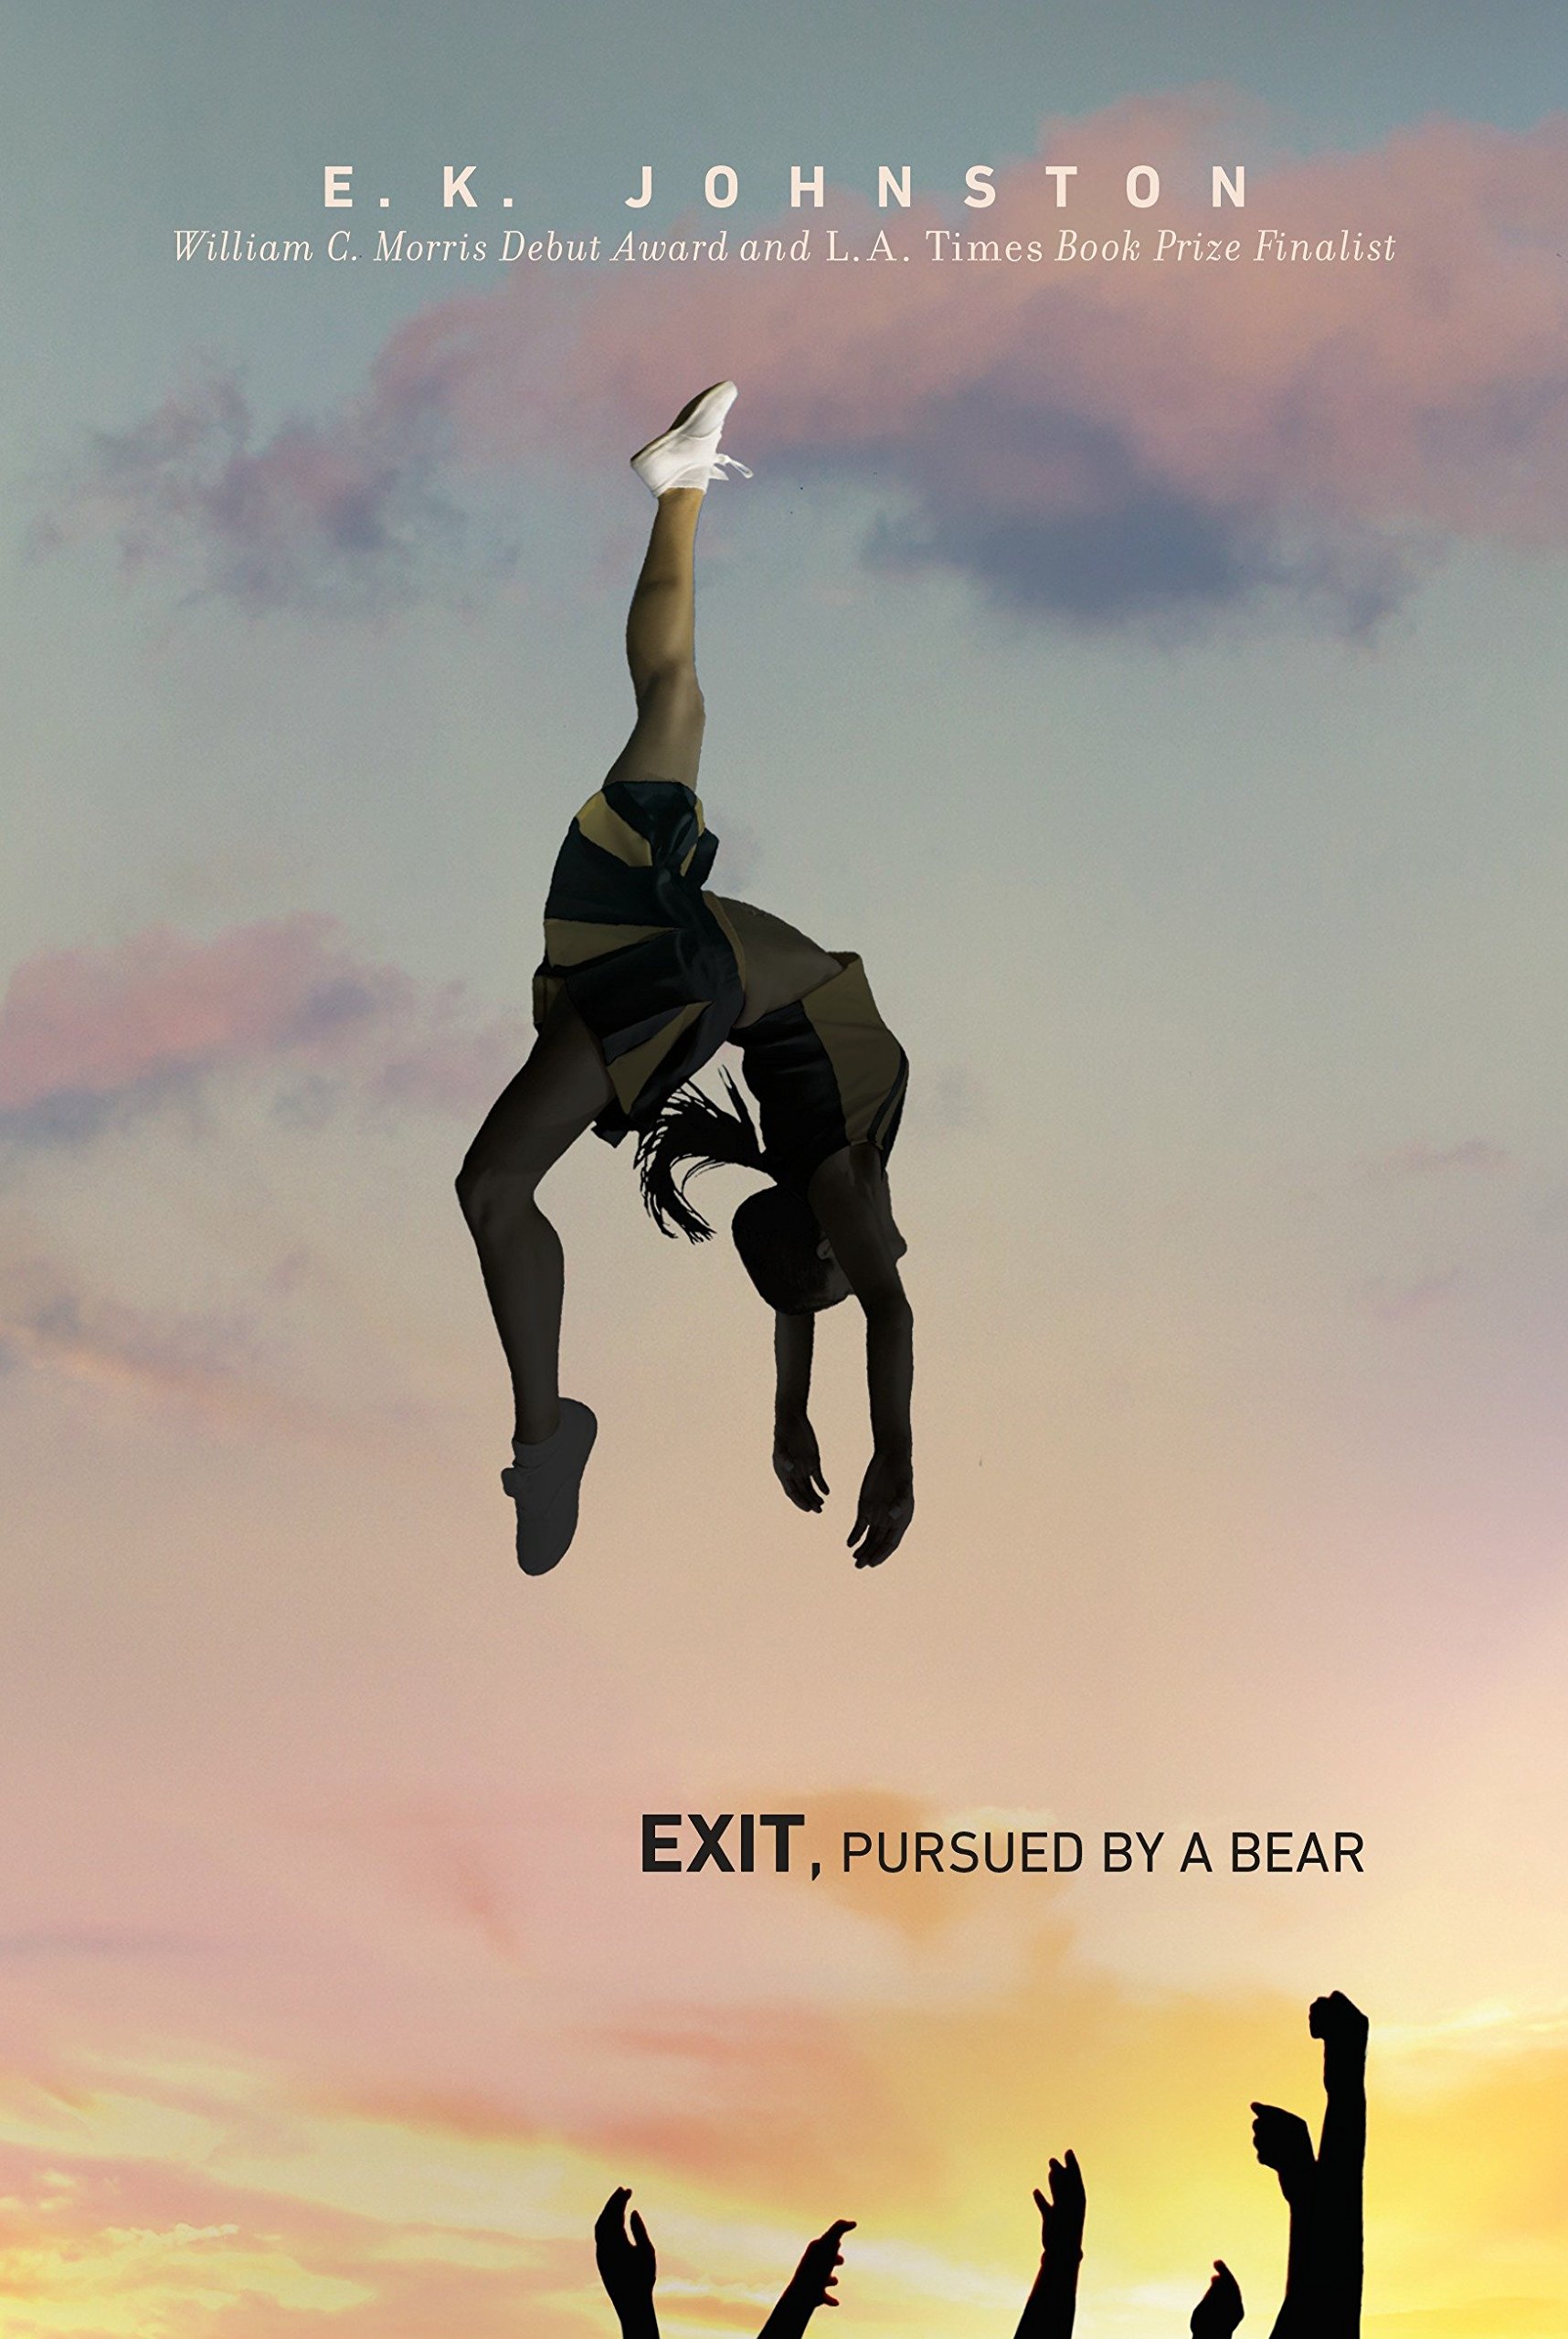 A silhouette of a cheerleader caught mid-tumble against a twilight sky, symbolizing a moment of intense drama or transition, representing the essence of the novel 'exit, pursued by a bear' by e.k. johnston.